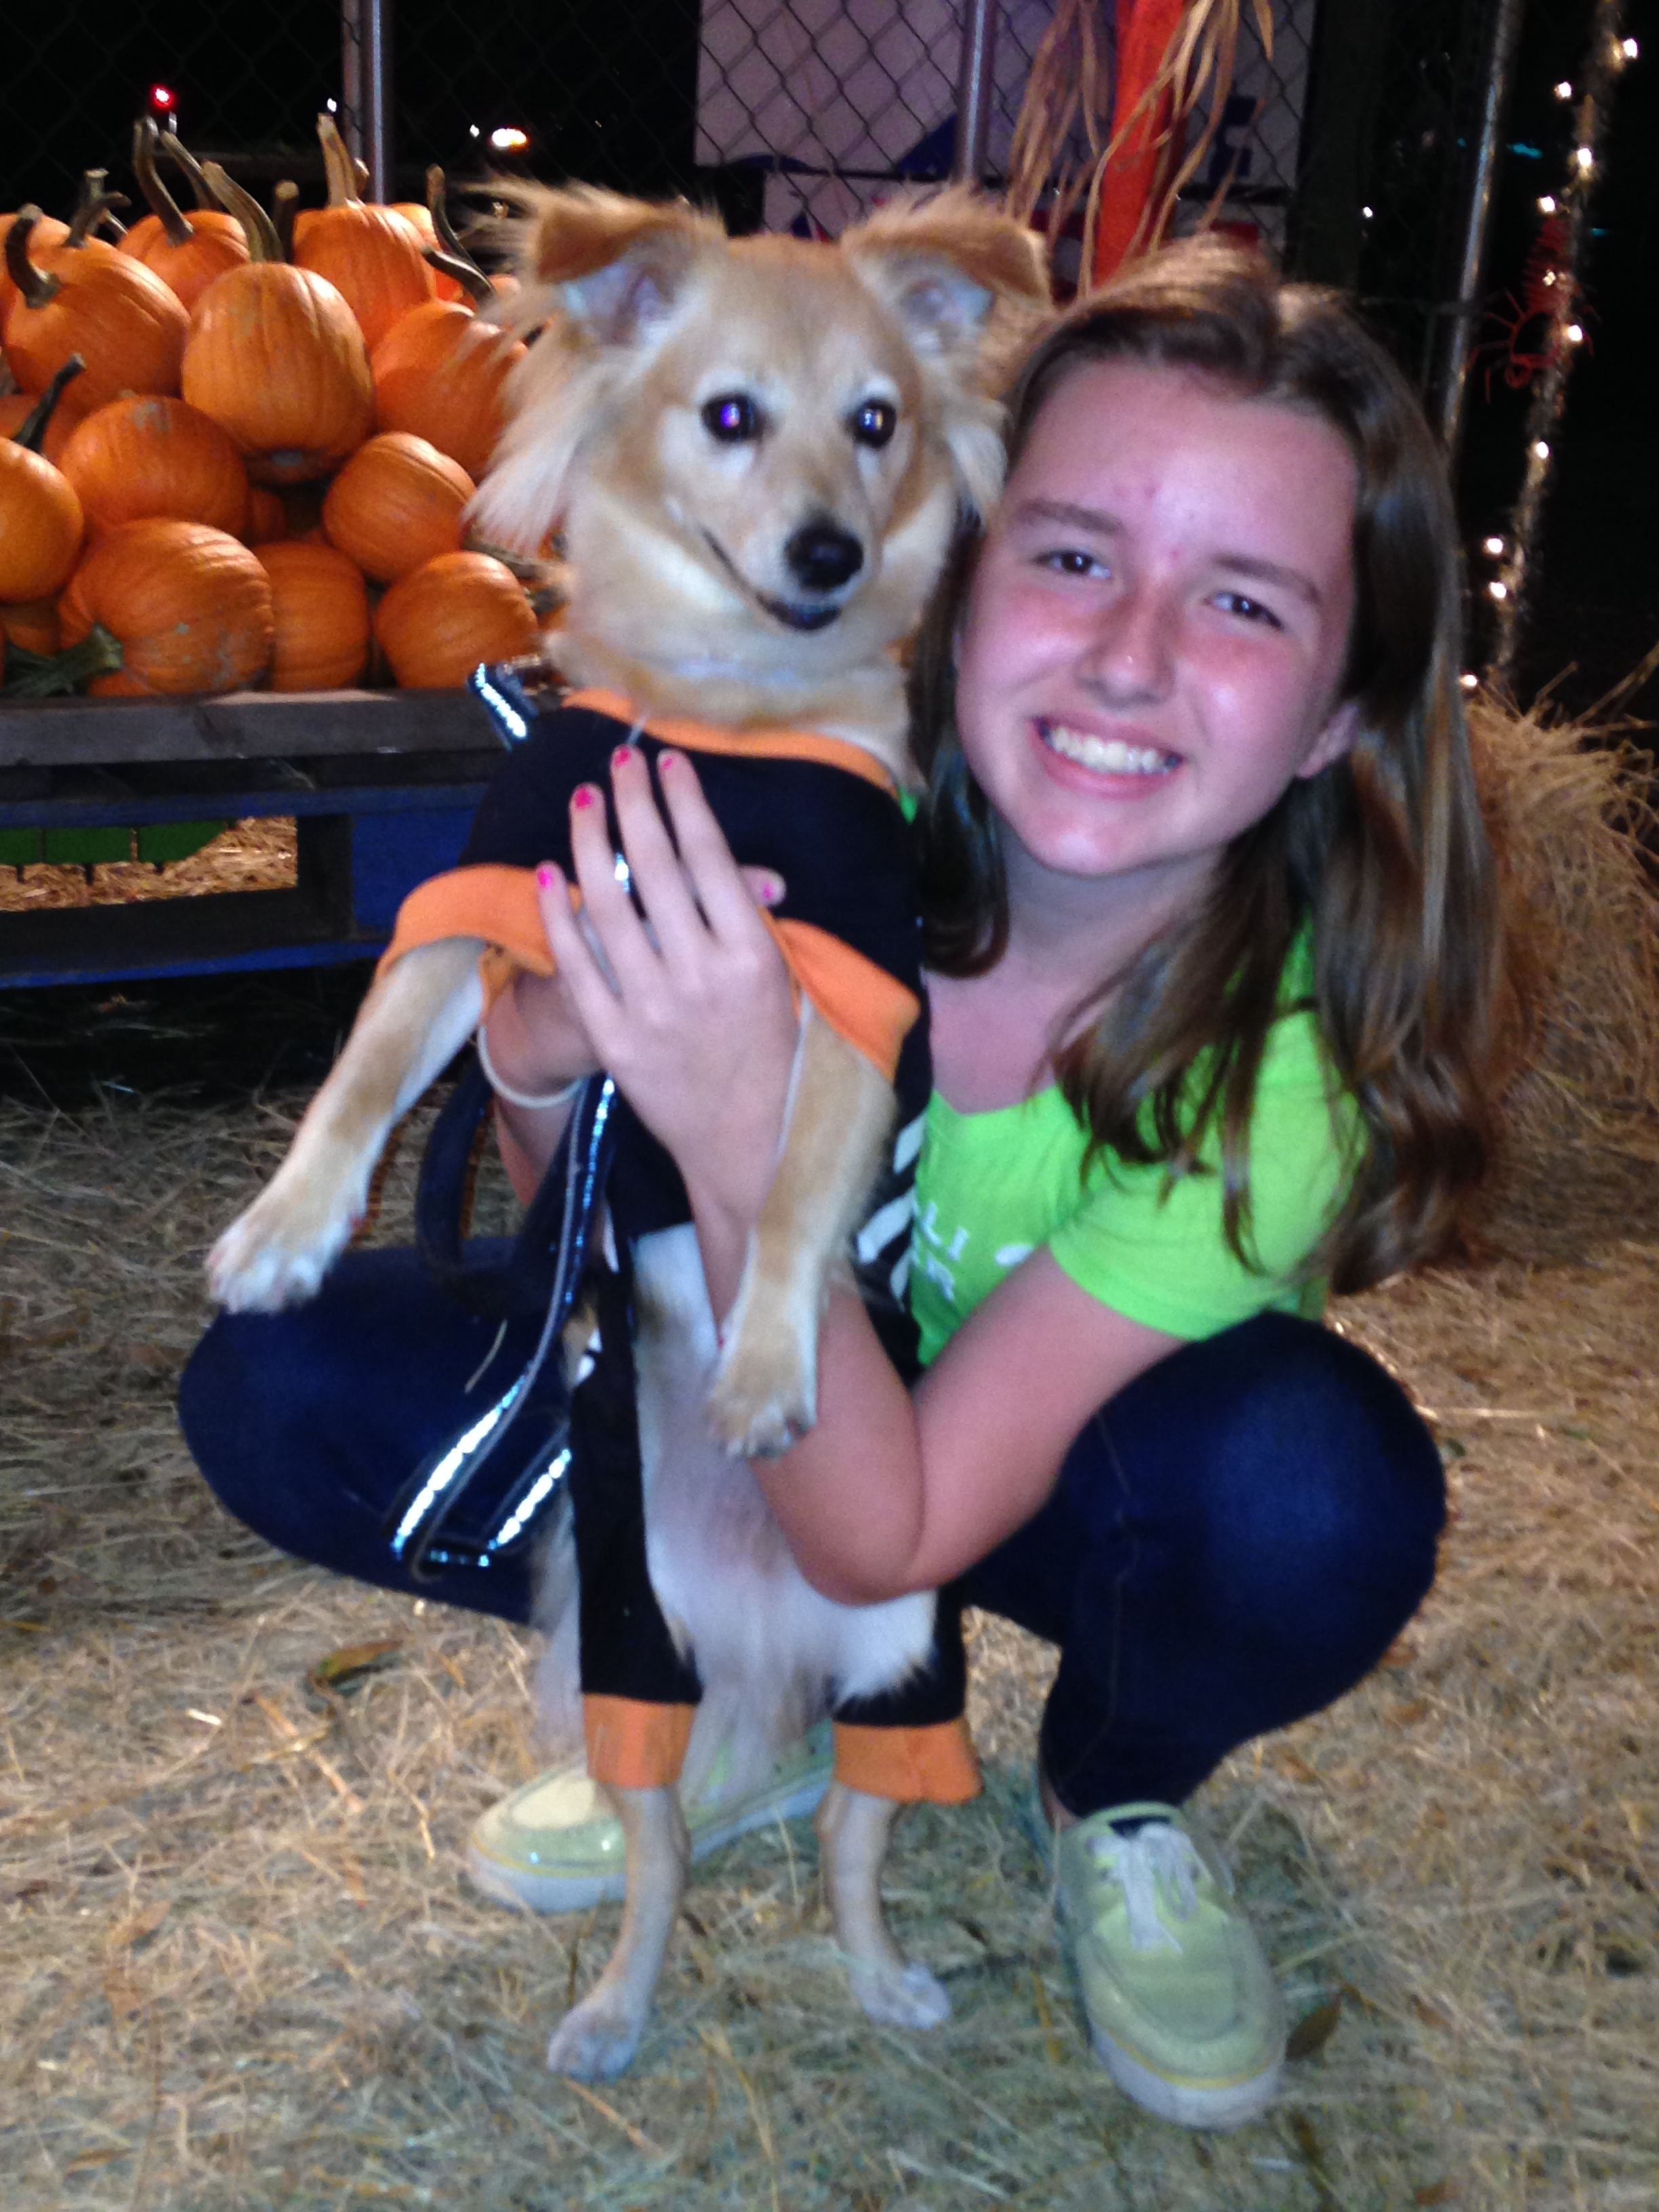 Young-girl- with- her- dog- in- hand- at- the- pumpkin- patch